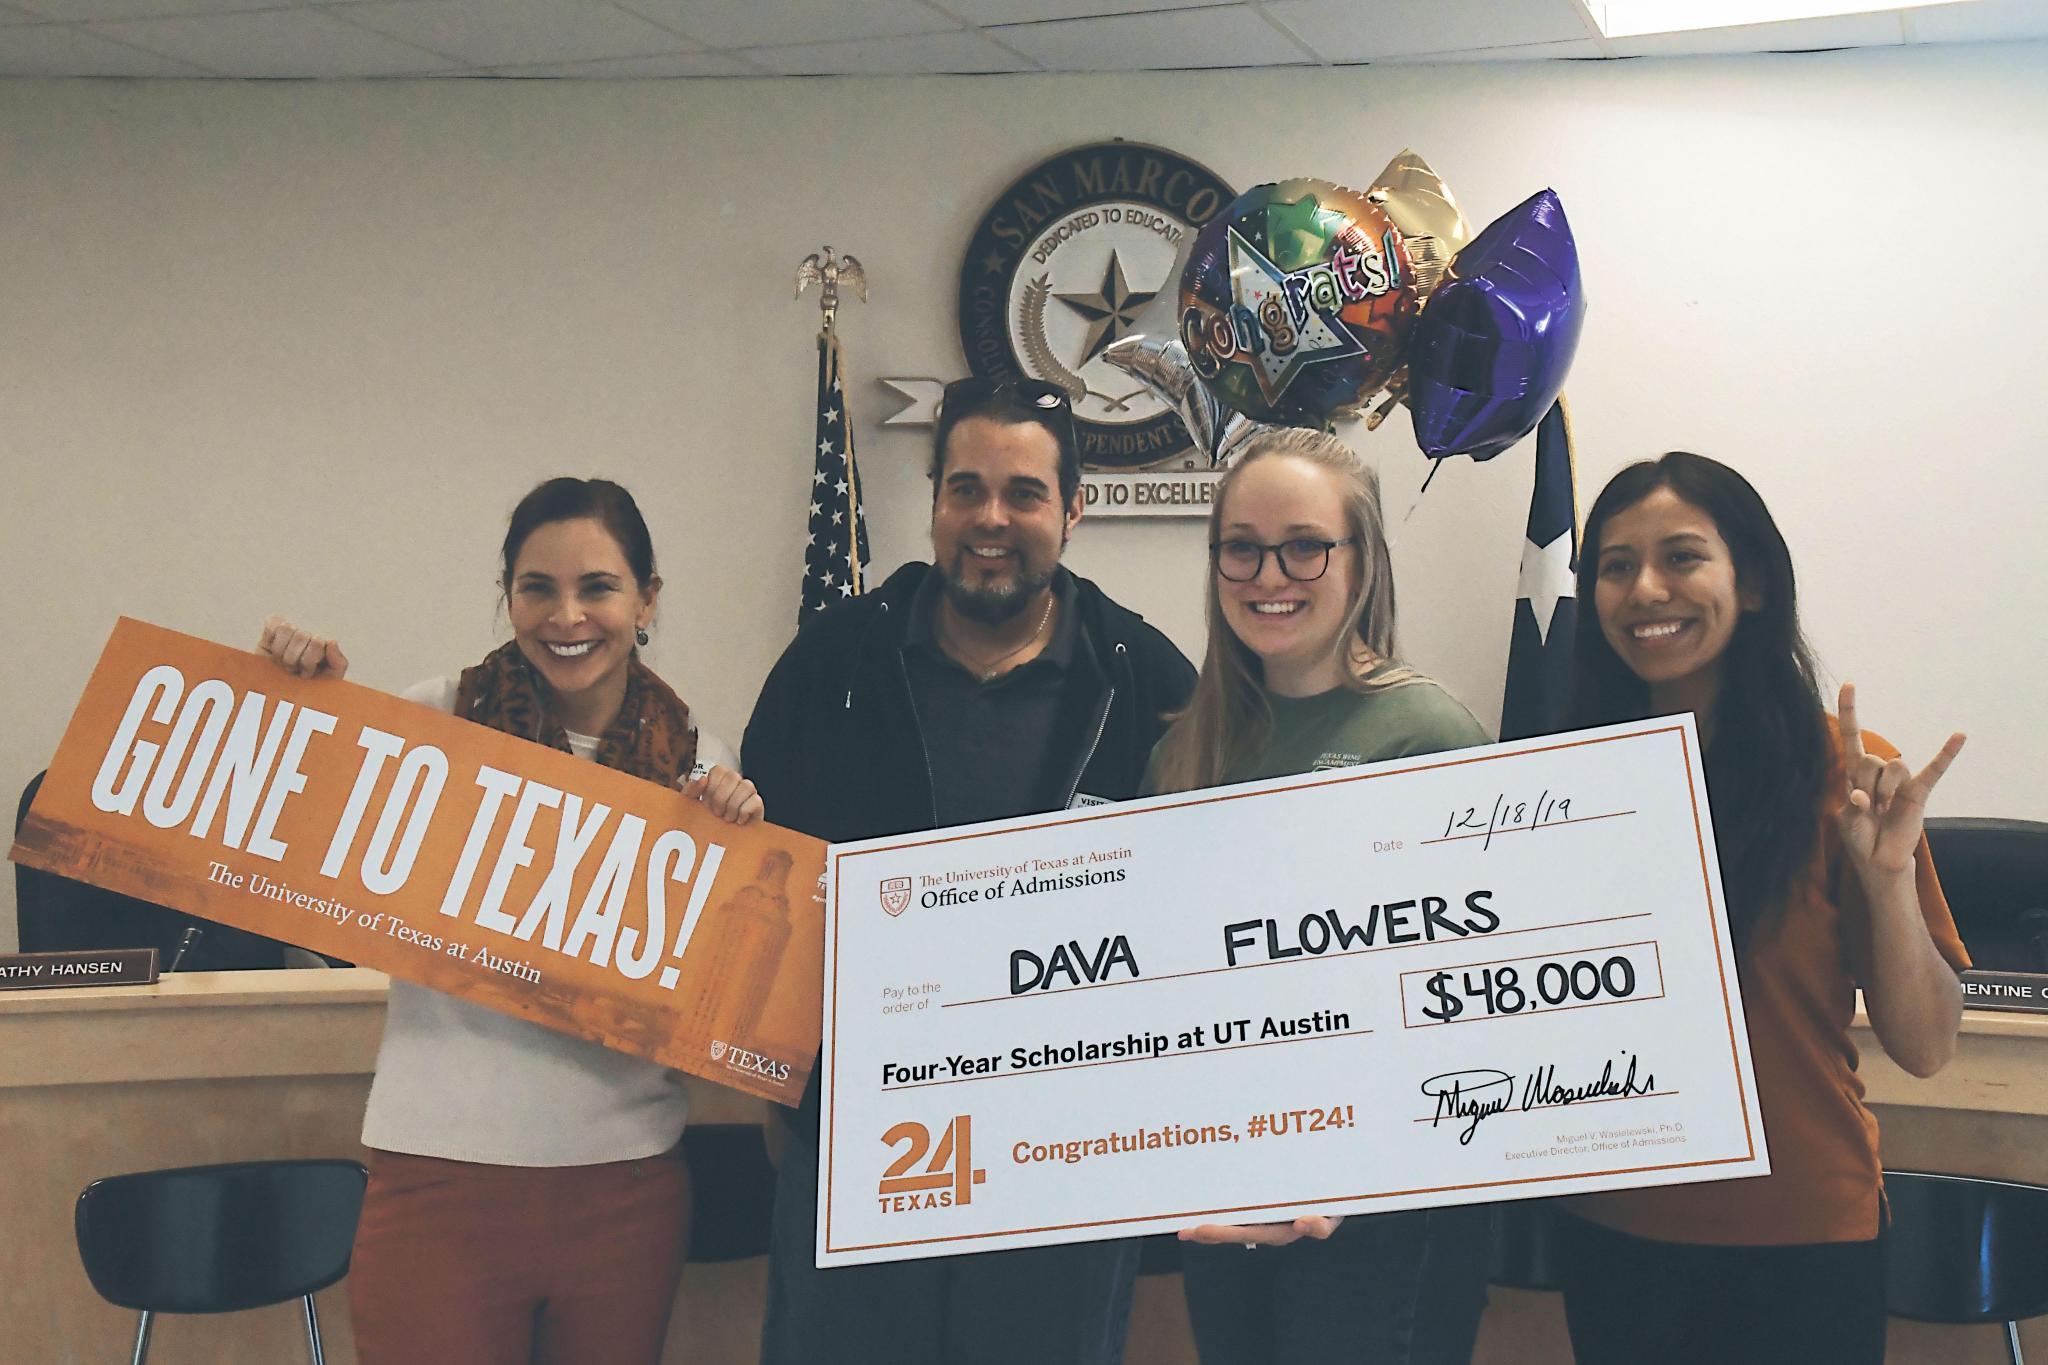 San Marcos High School Student Receives 48 000 Scholarship From